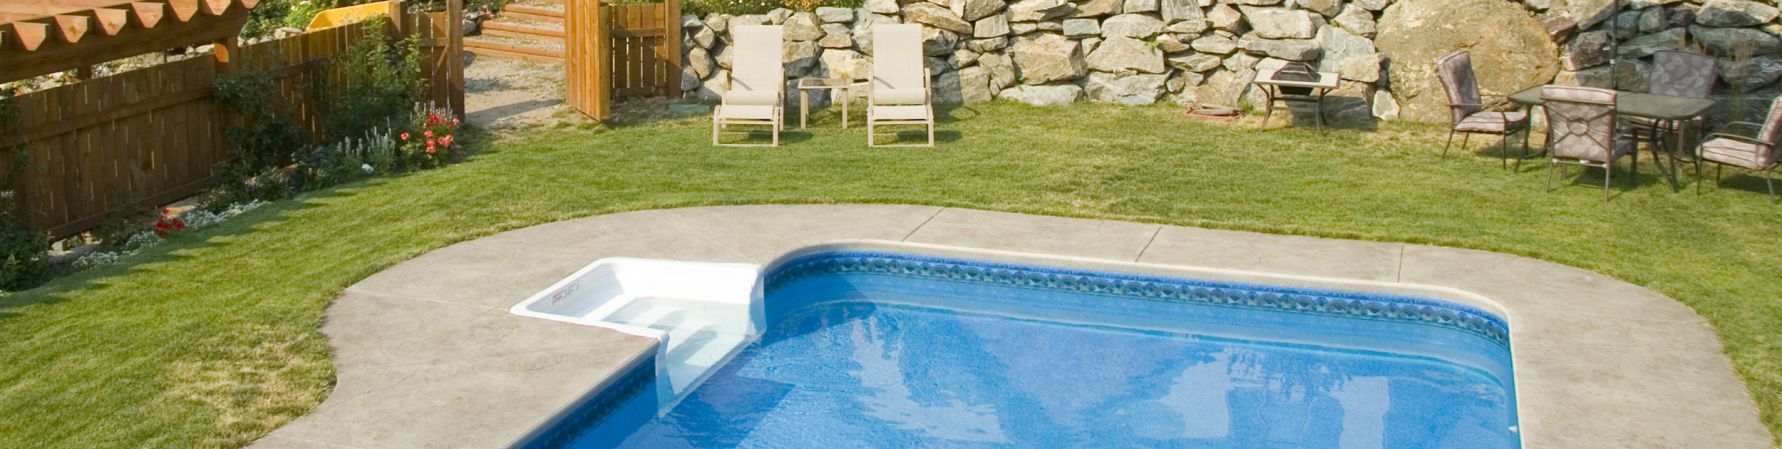 in-ground swimming pool with stone sitting area around it surrounded by grass and a stone wall; some lawn furniture is shown